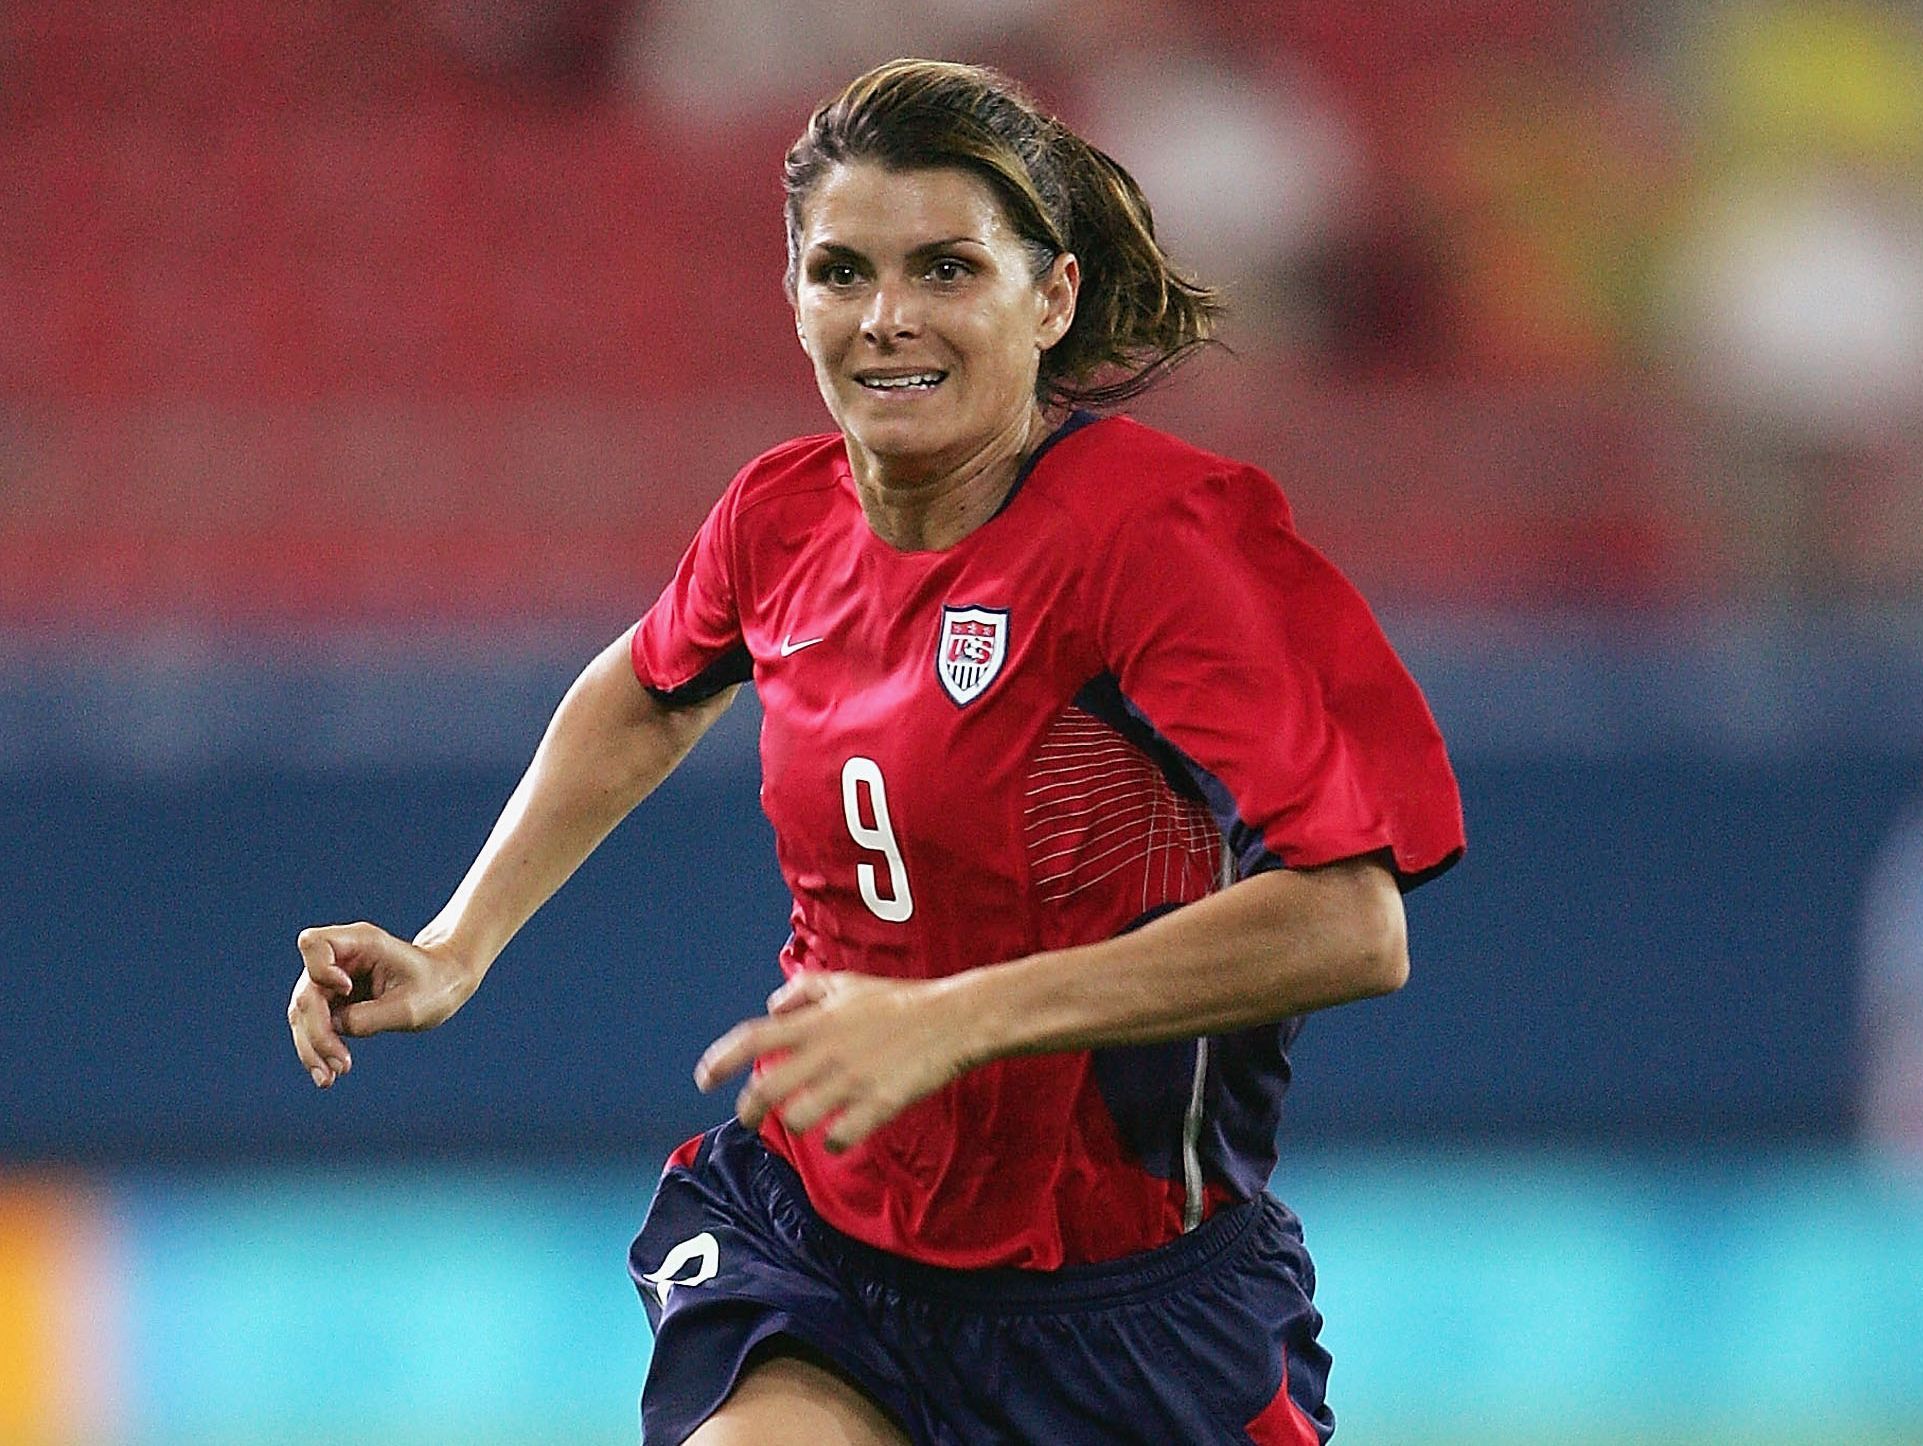 U.S. Women's National Team member Mia Hamm plays during the Olympic gold medal match on Aug. 26, 2004, in Athens, Greece. The international soccer star will be the guest speaker at this summer's Courier-Journal Sports Awards.